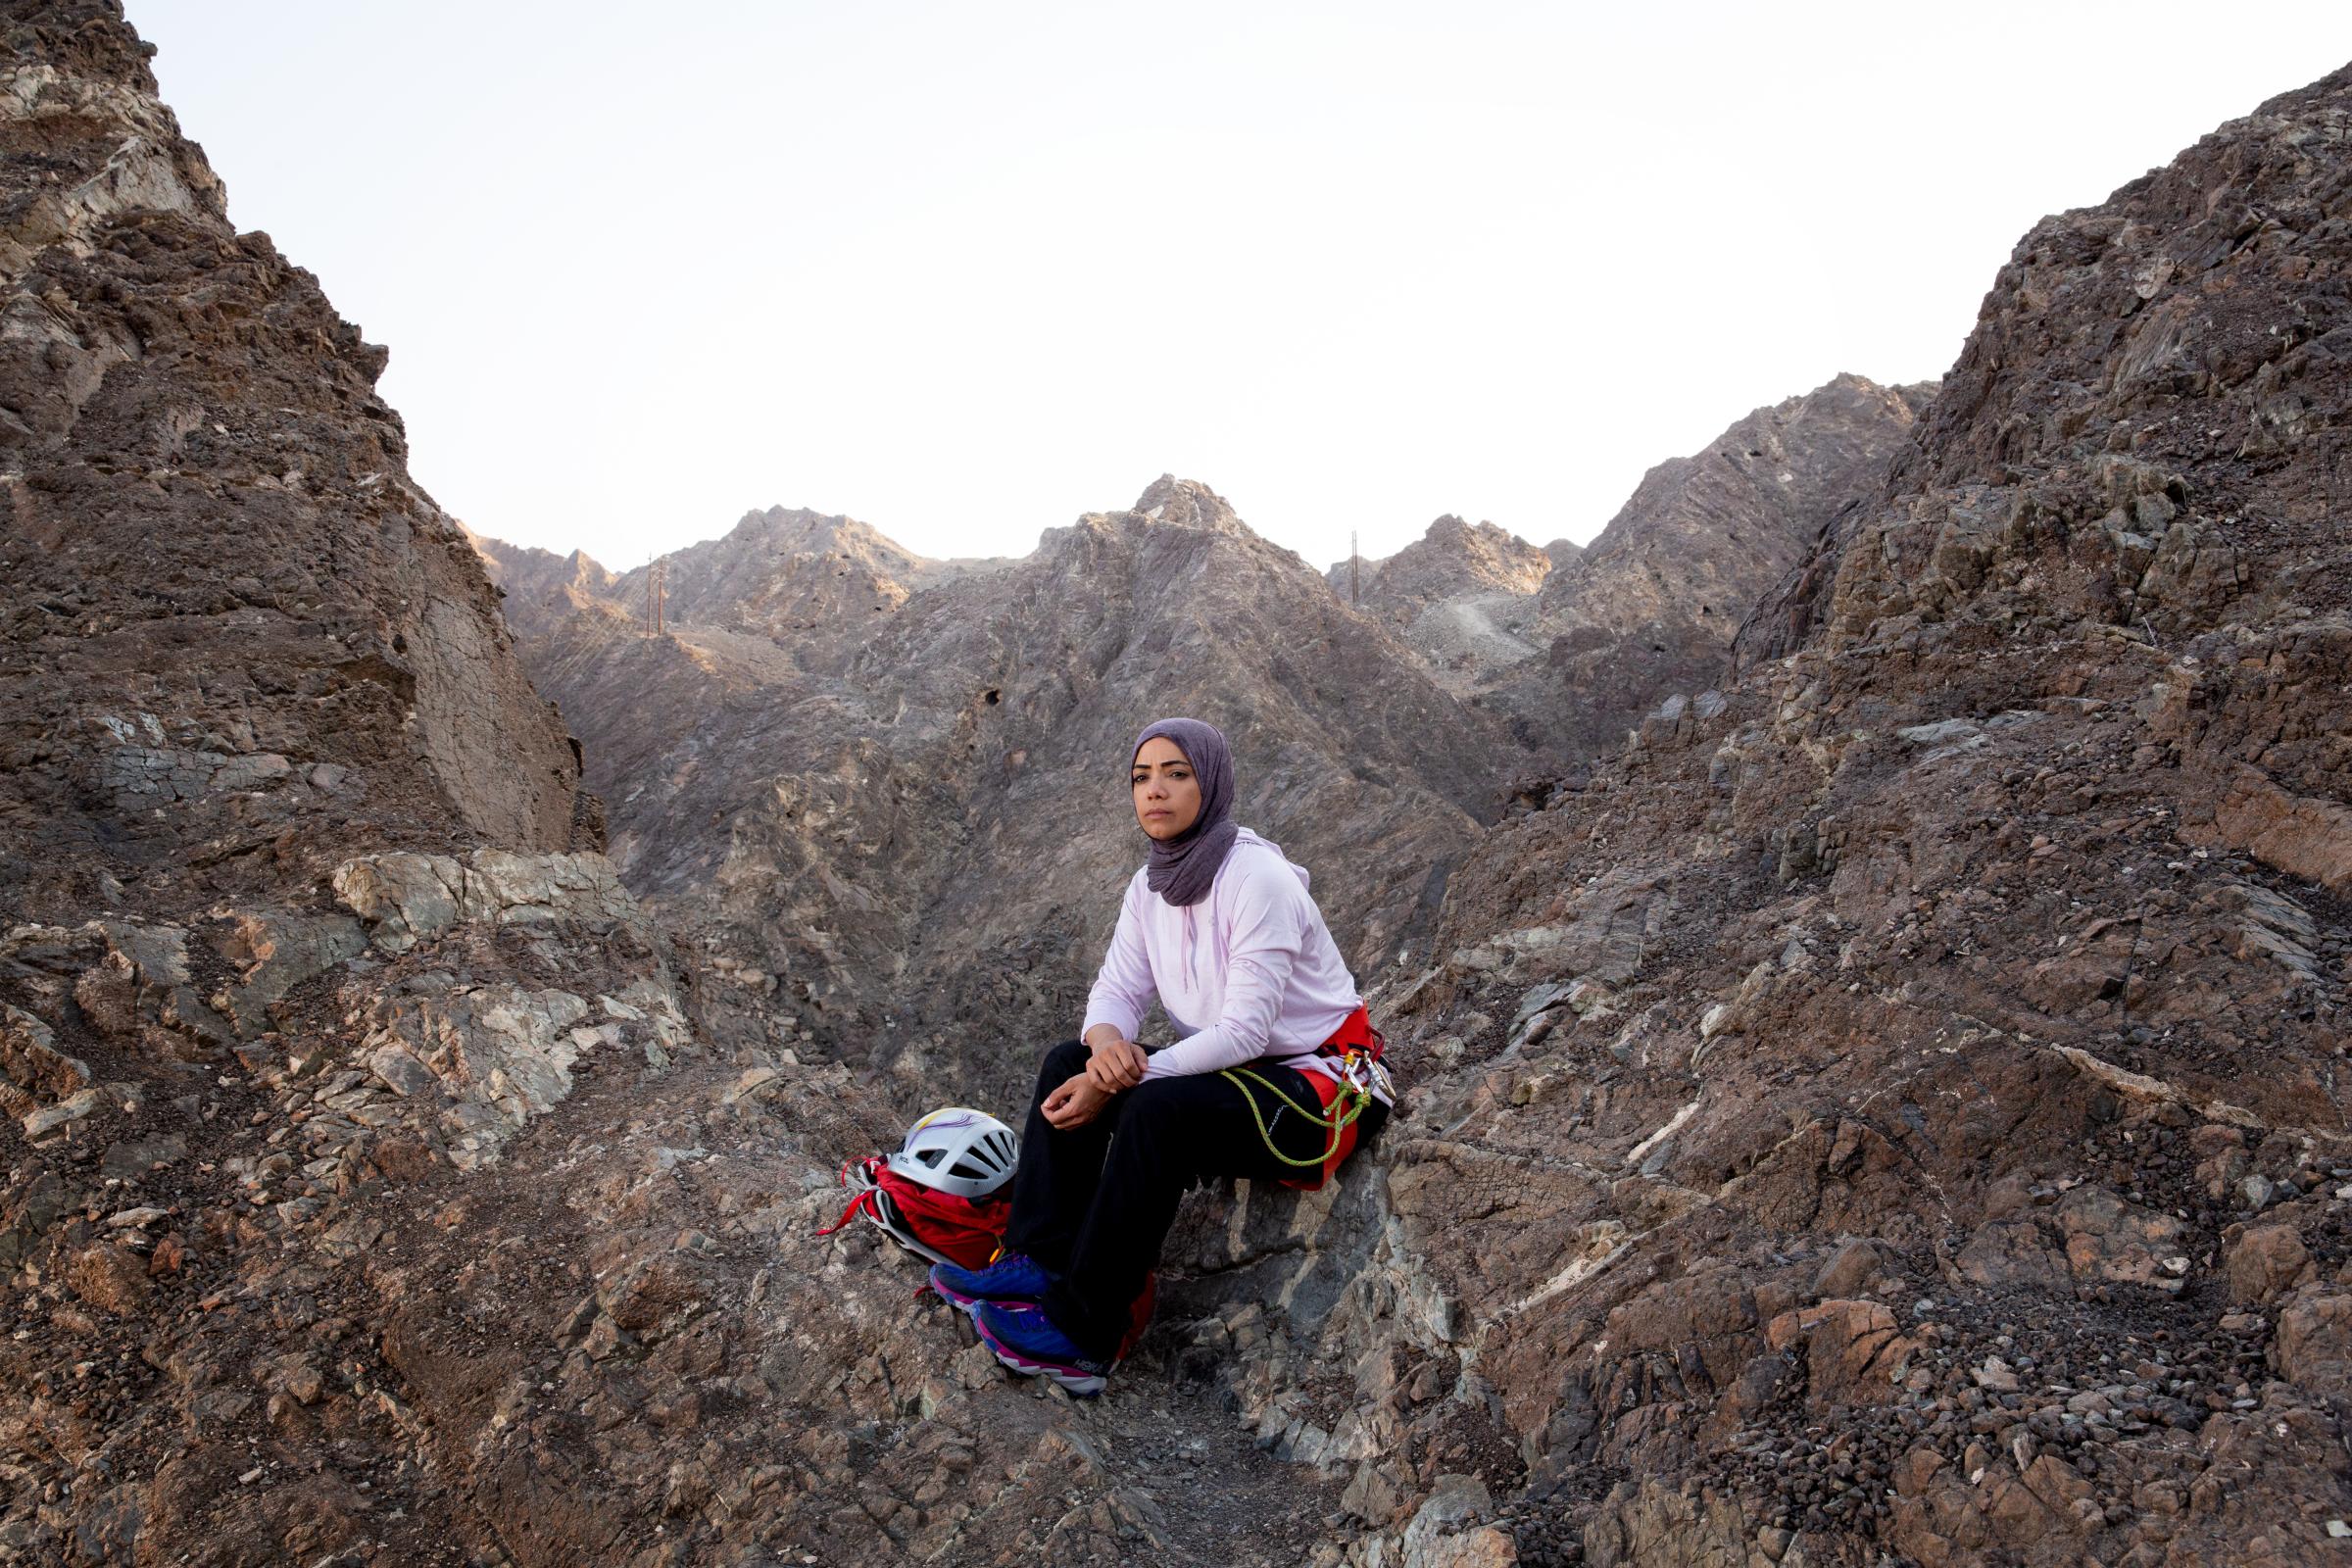 Young Oman - Oman, Muscat. Nadhira Alharthy, aged 41, is the first...